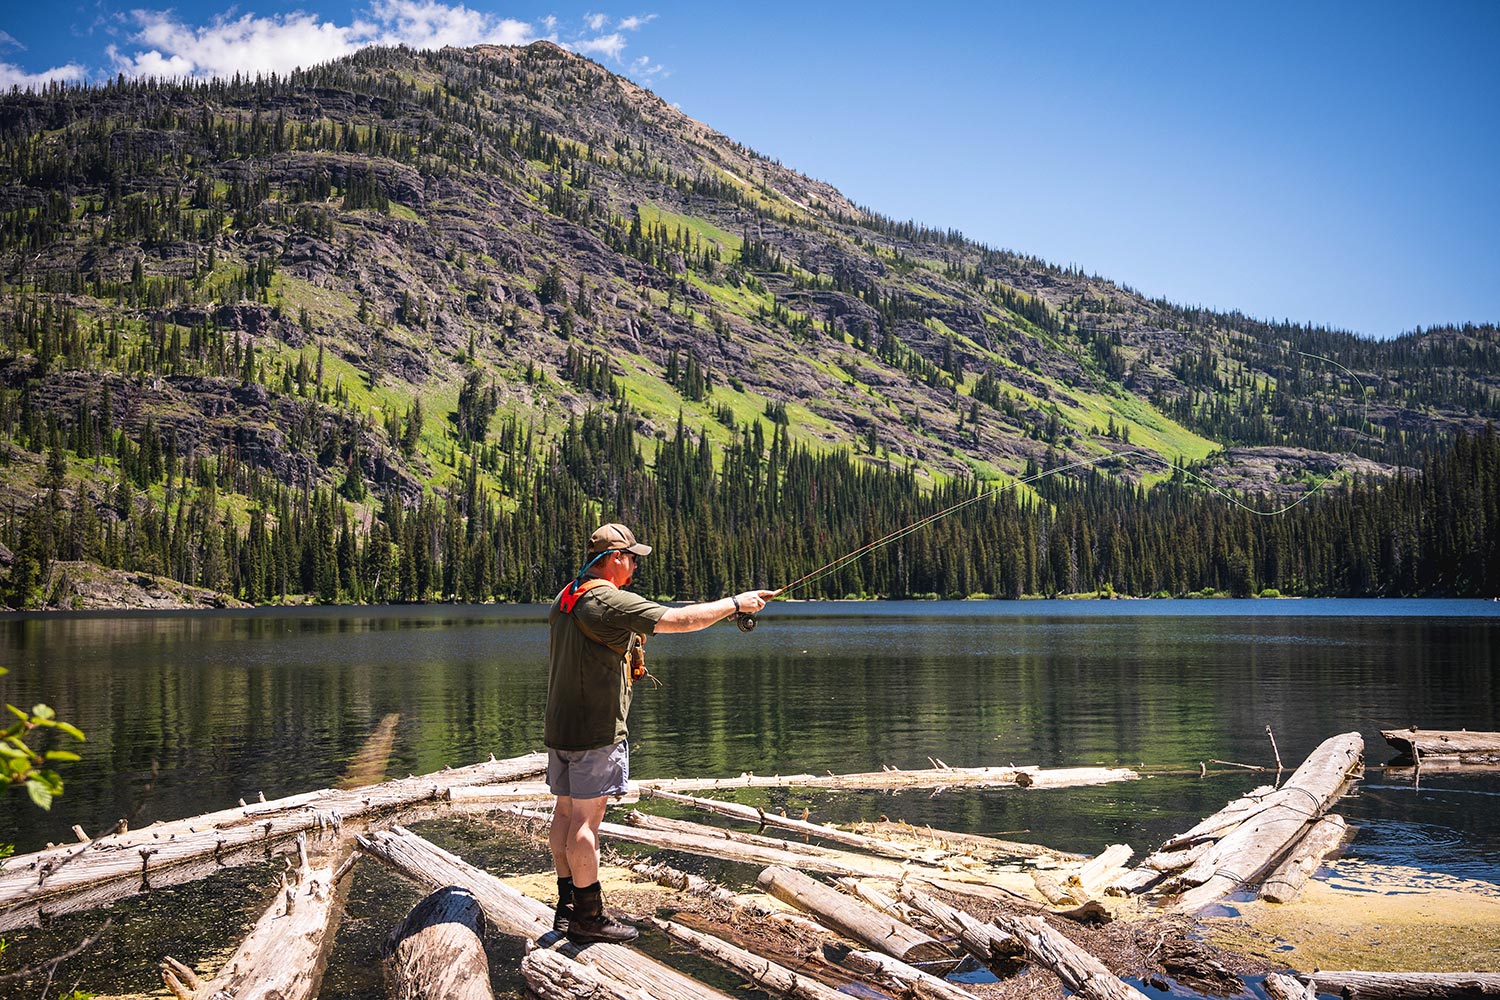 Angler fly casts from logjam into placid mountain lake